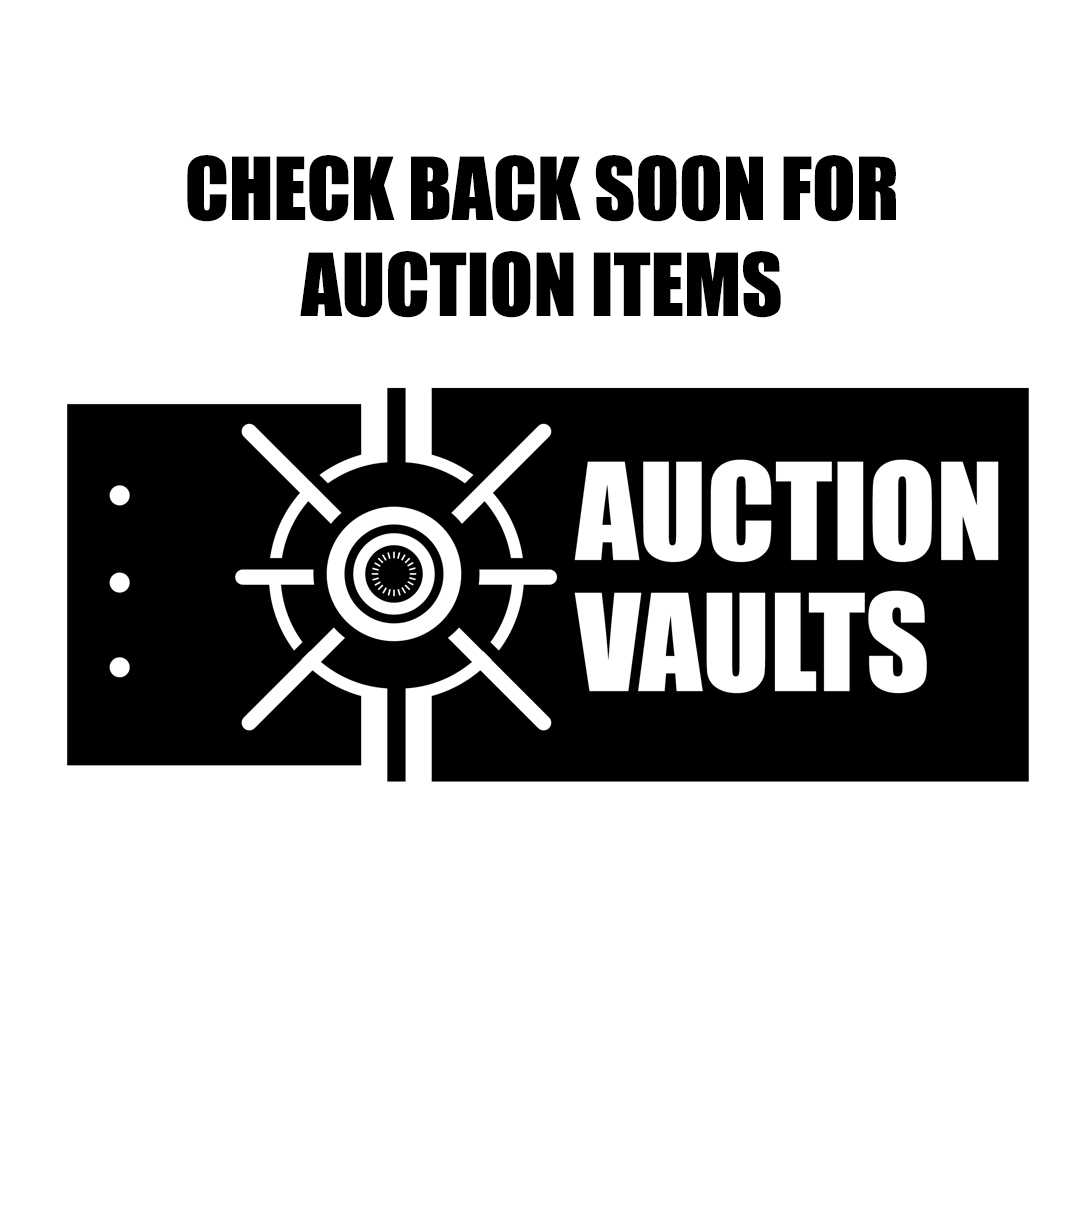 COIN AUCTION ONLINE